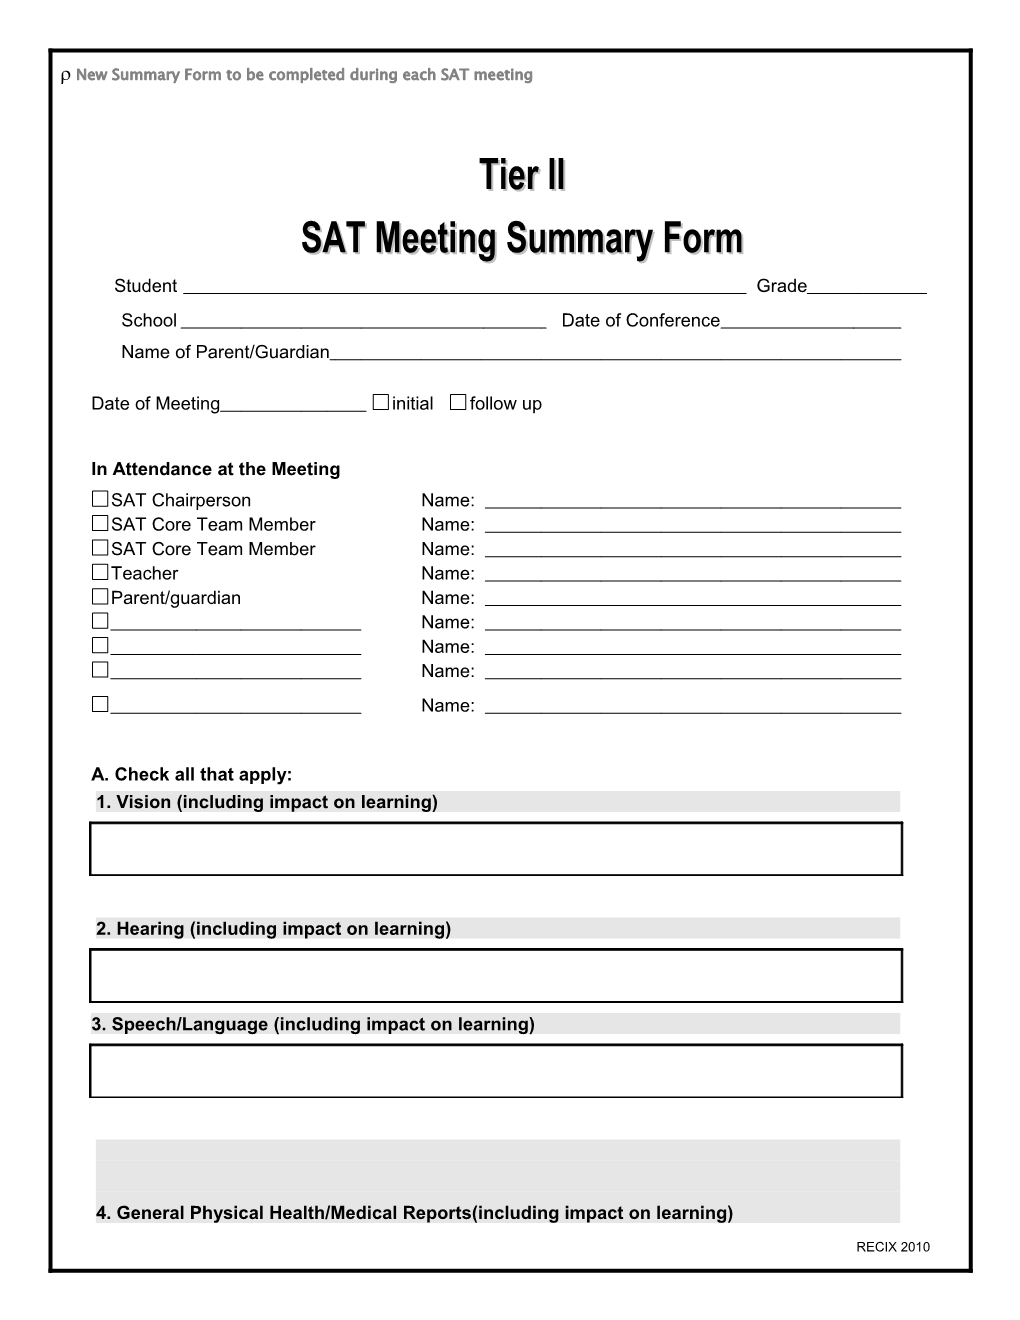 R New Summary Form to Be Completed During Each SAT Meeting